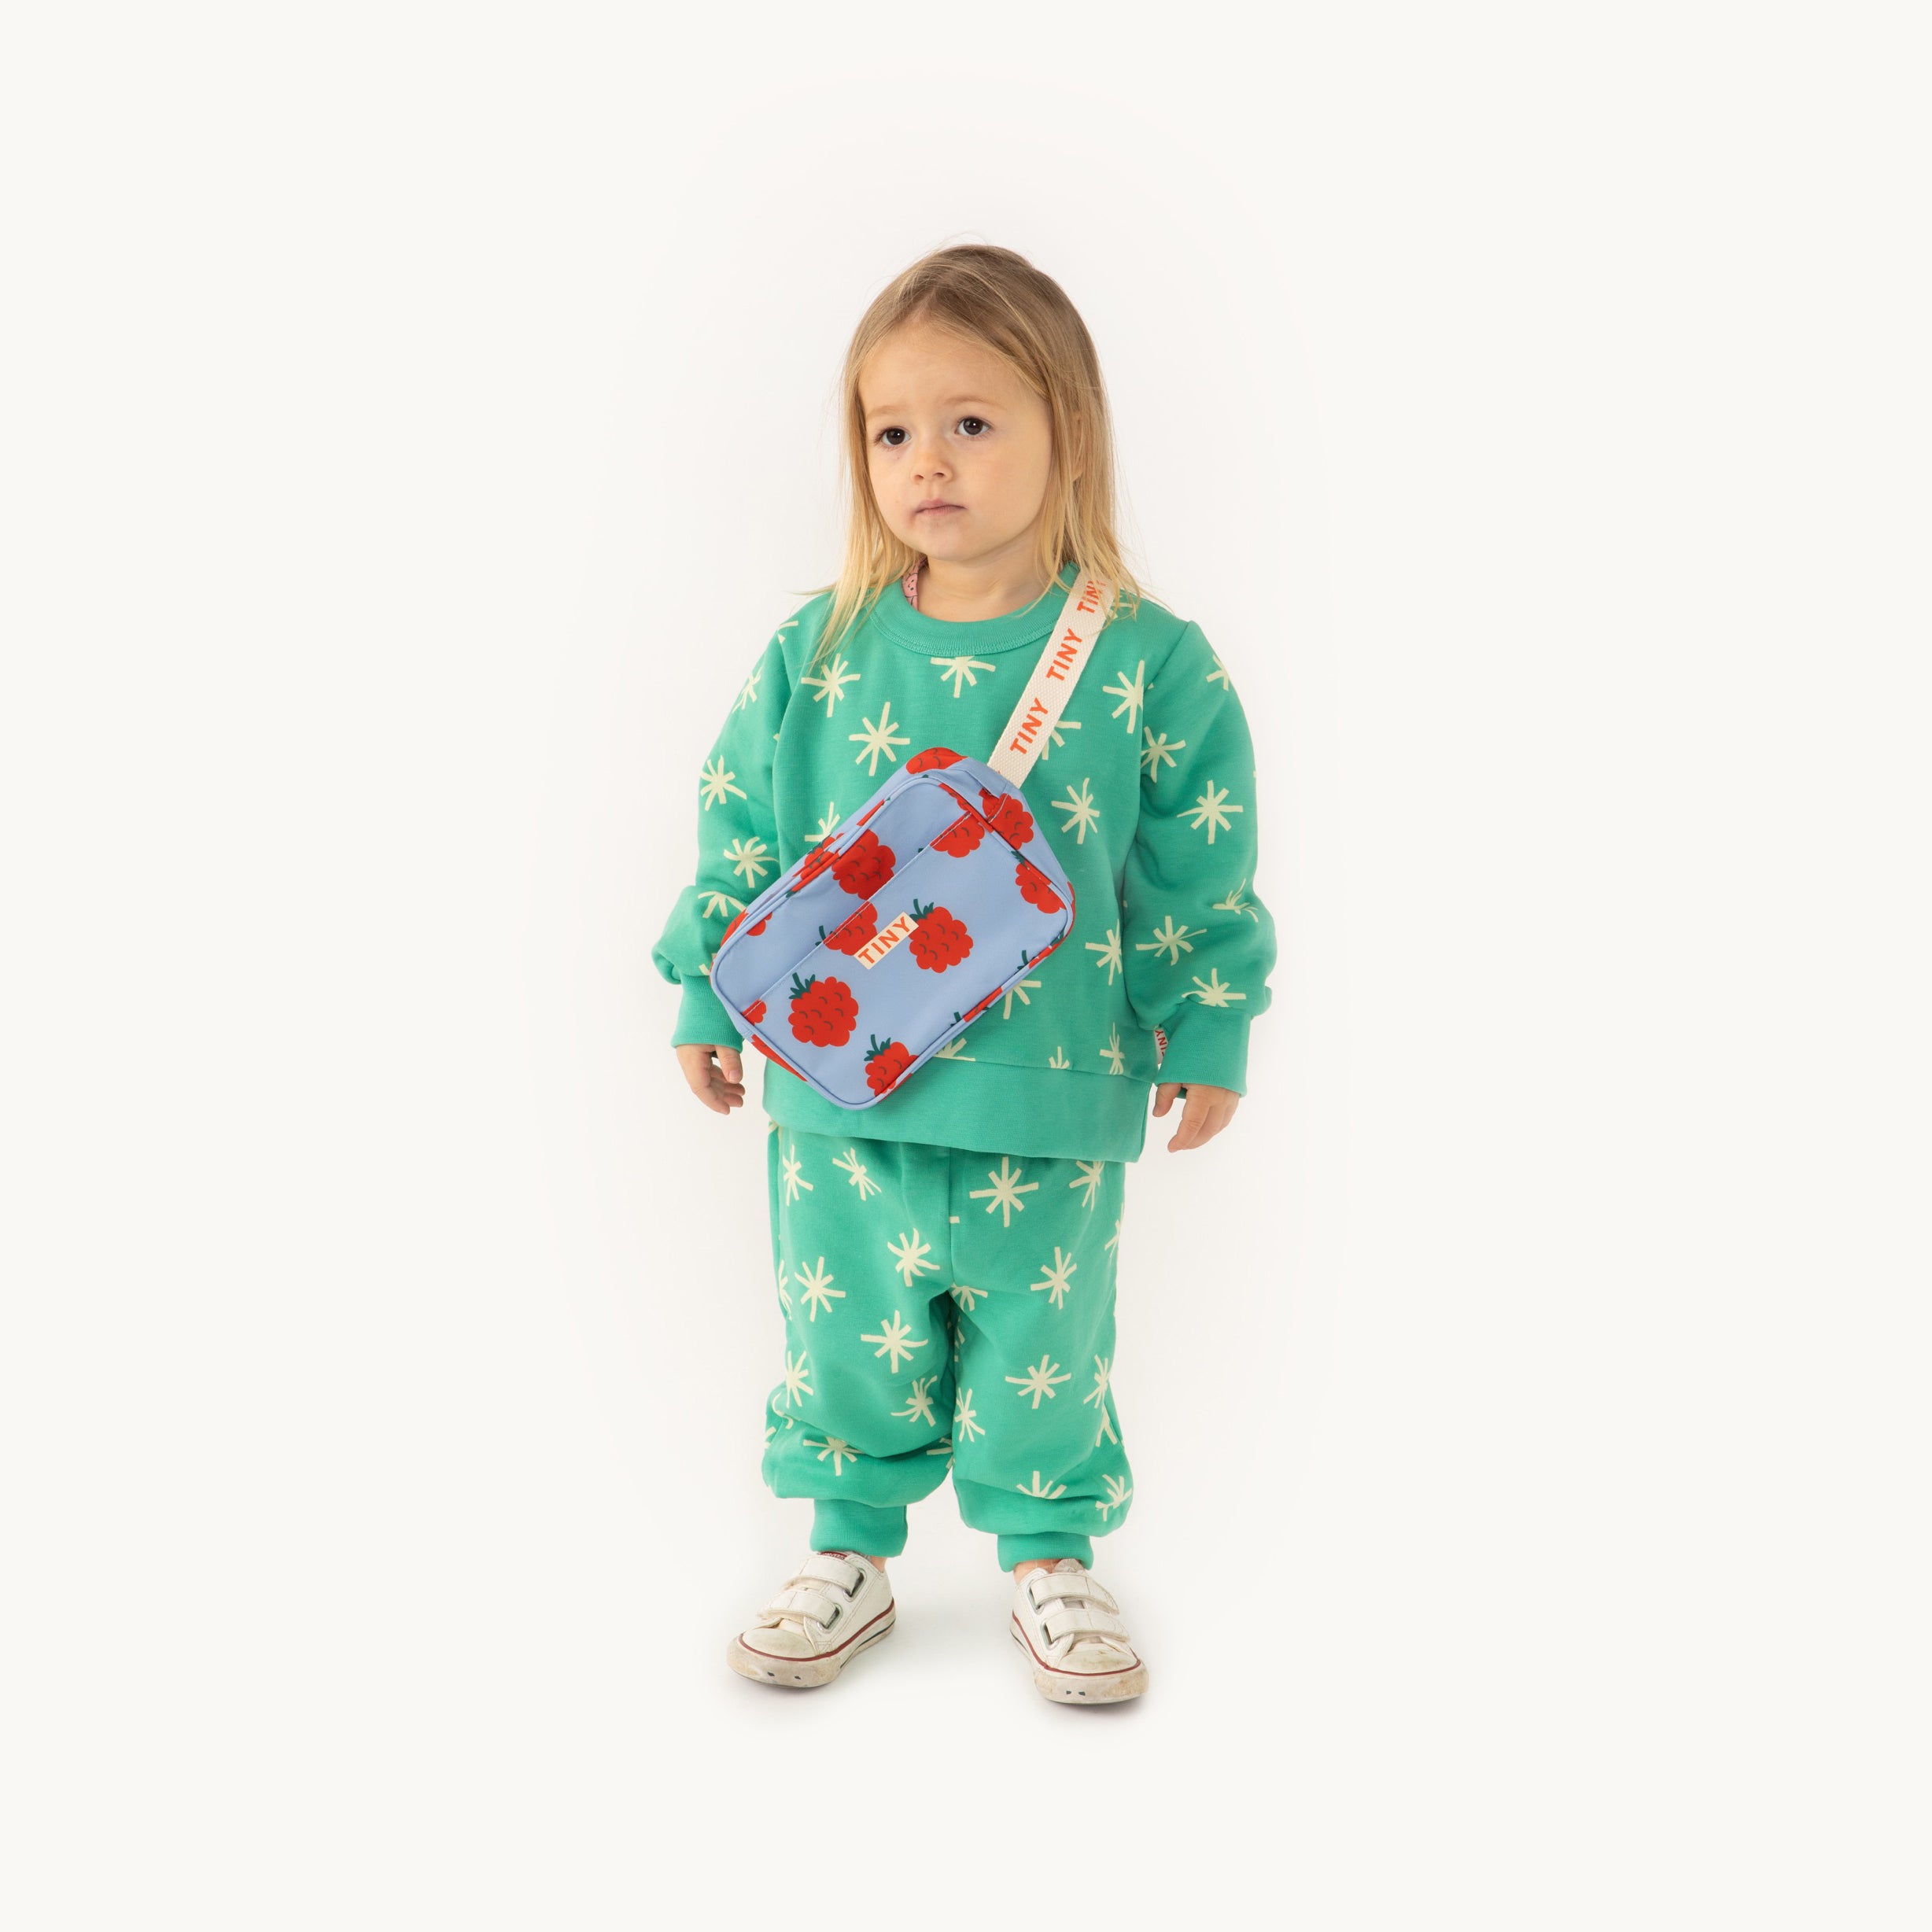 Boys & Girls Green Printed Cotton Trousers